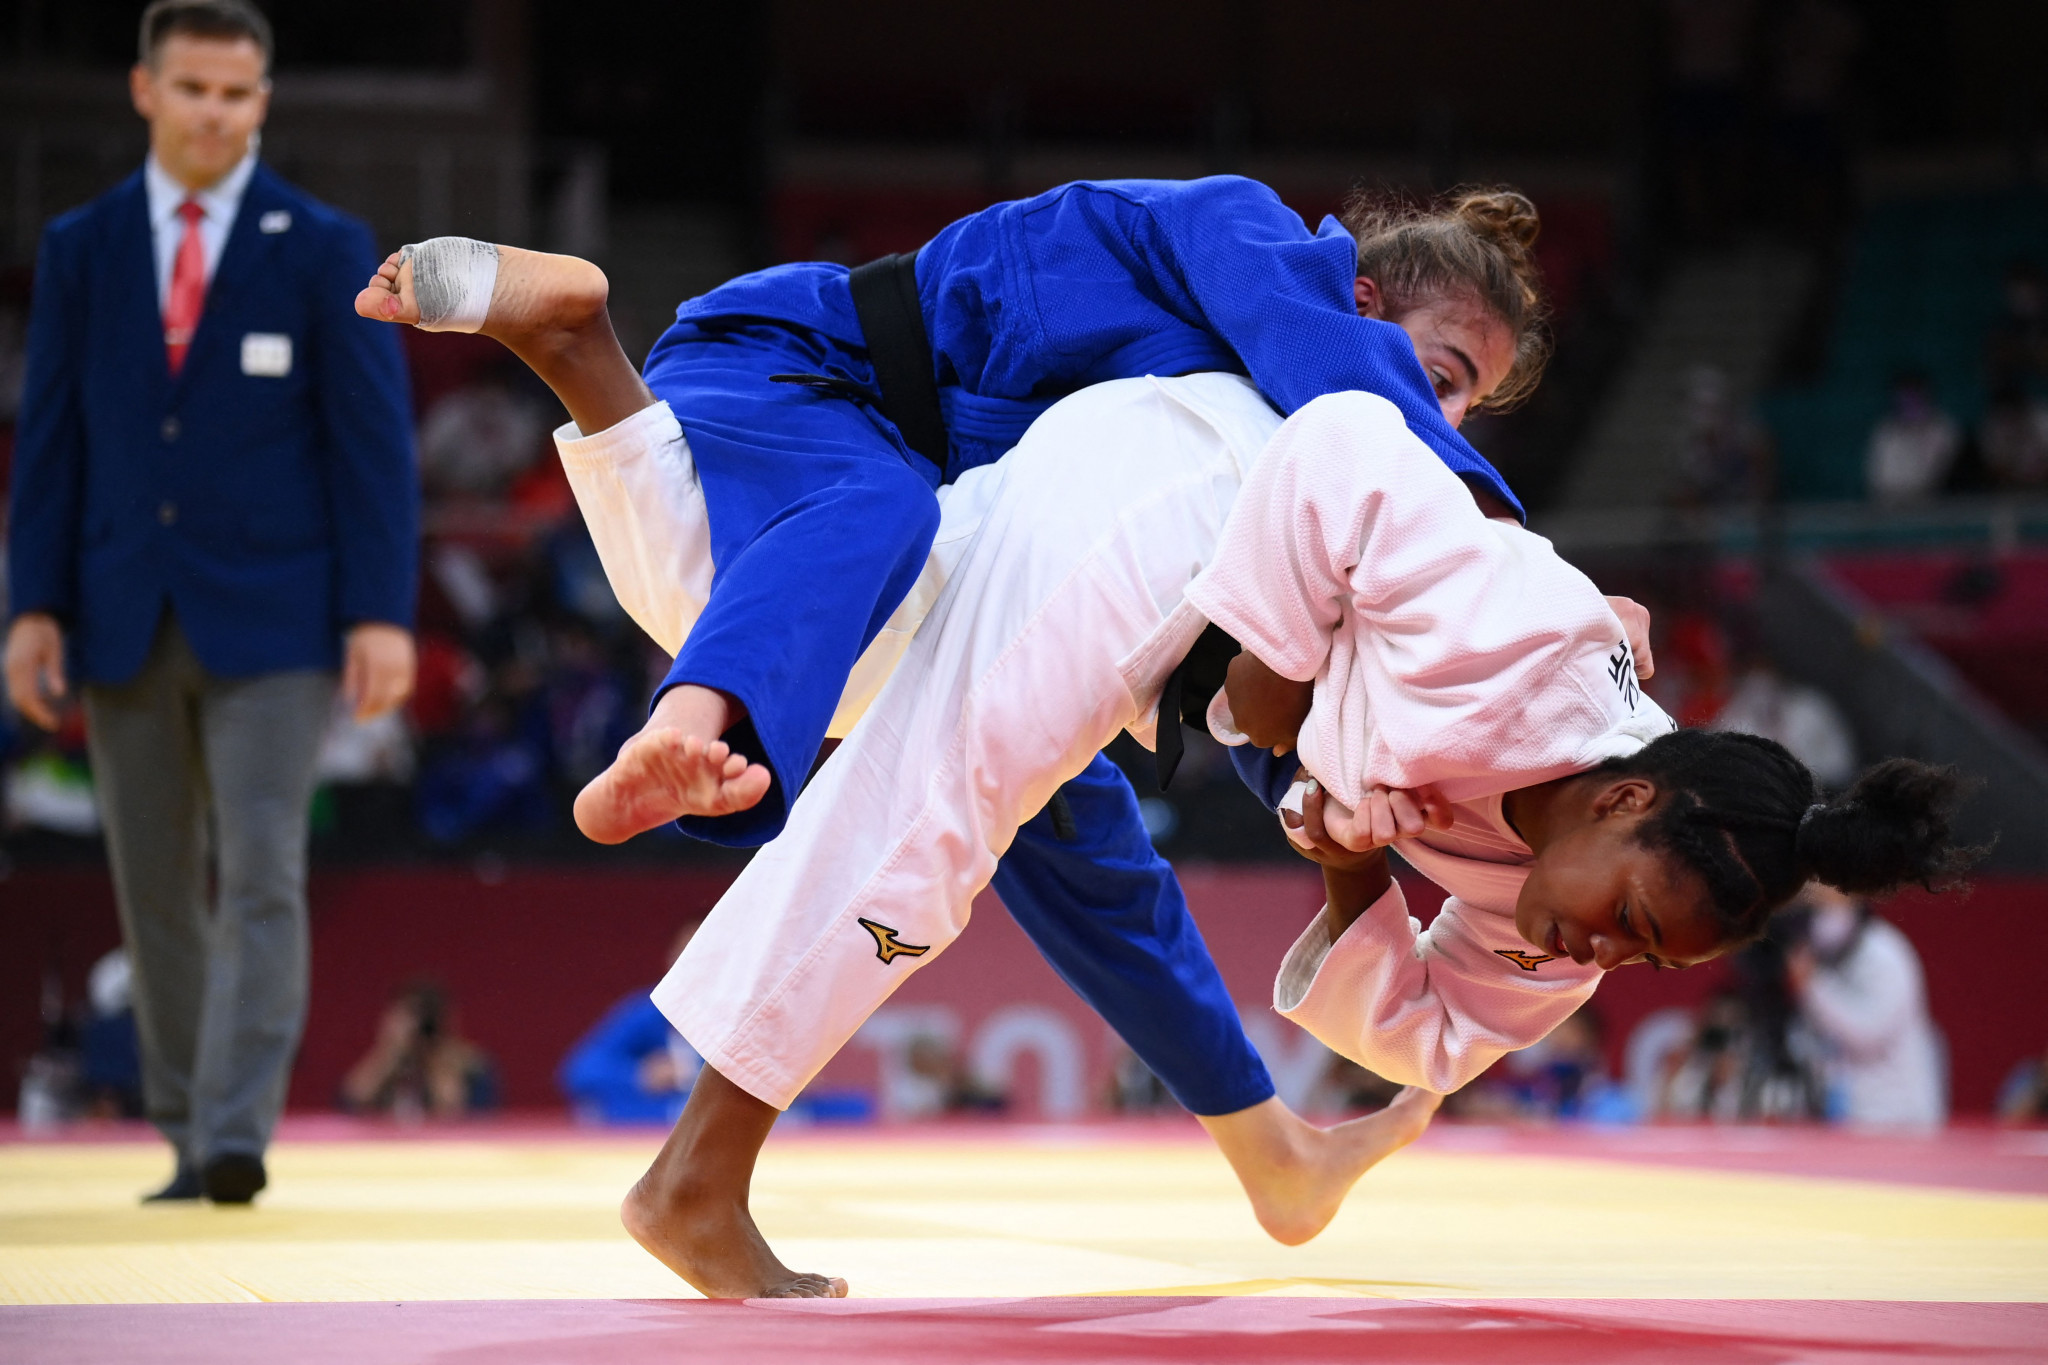 France Judo has partnered with marketing company Infront ©Getty Images